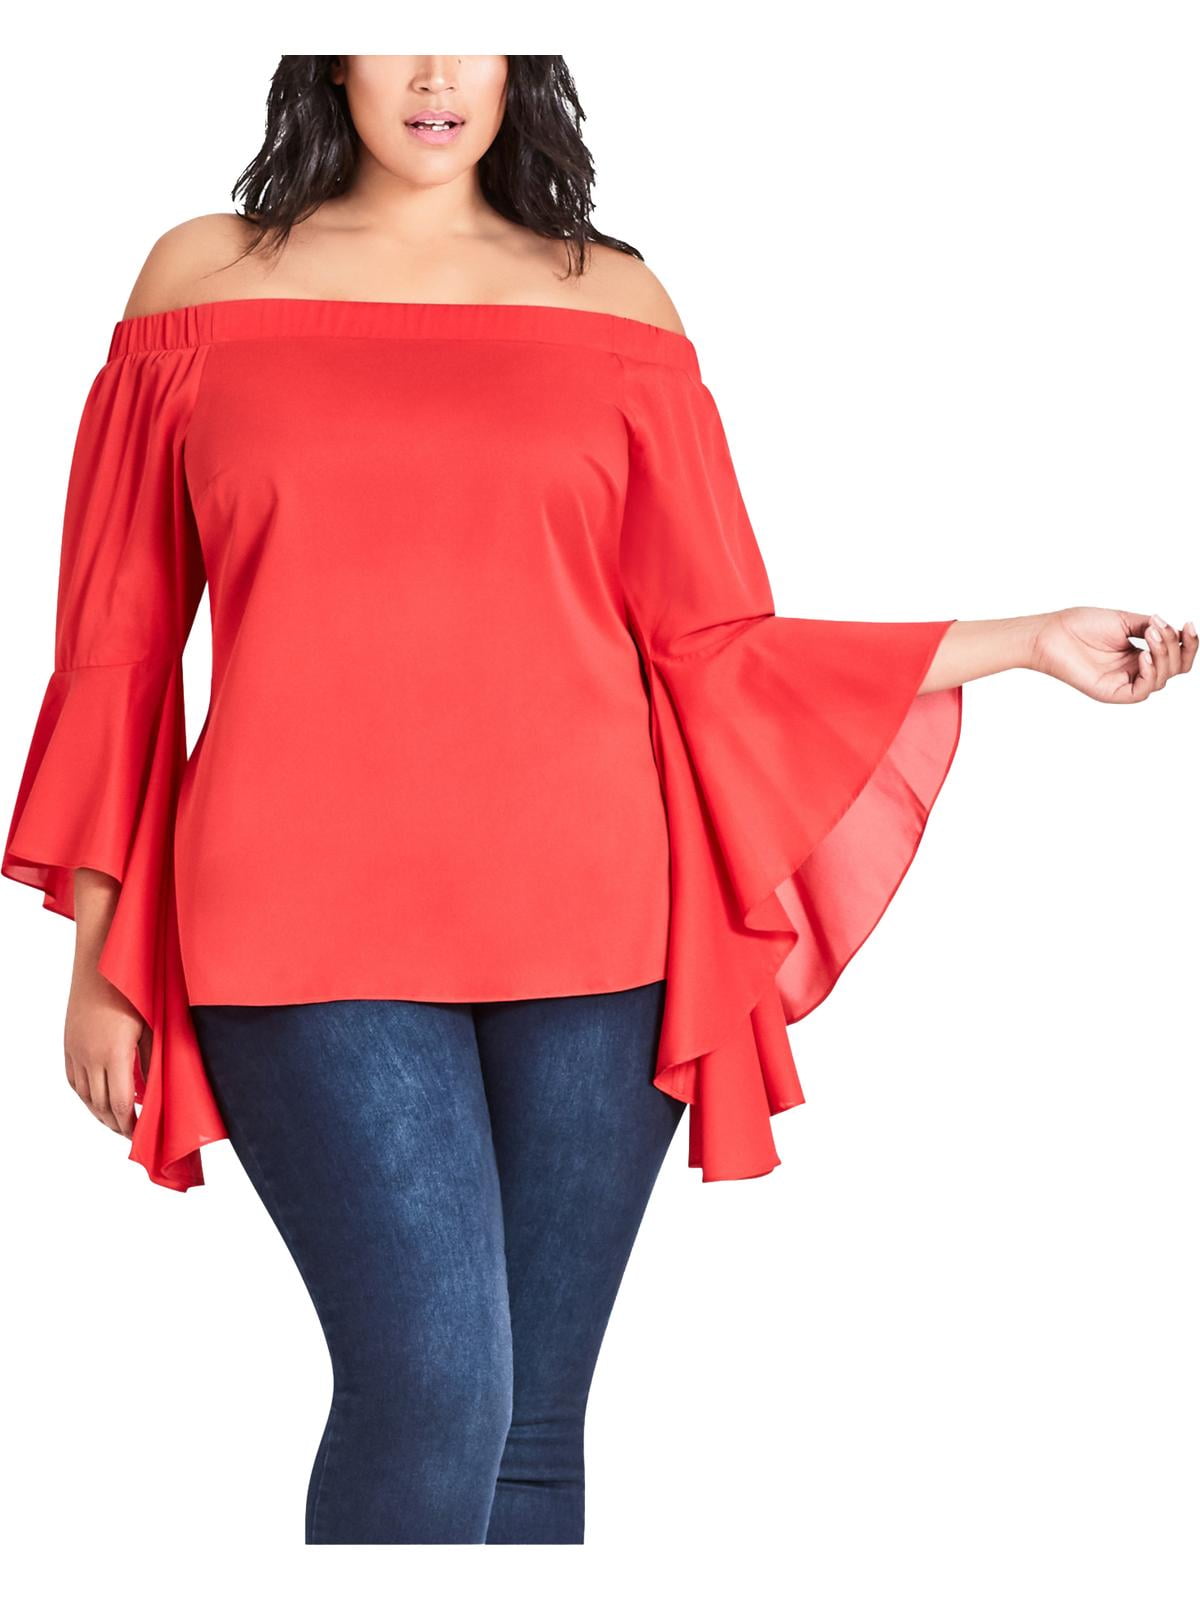 City Chic Womens Apparel Womens Plus Size Contrast Shoulder Peplum Top with Bow Sleeve Detail 